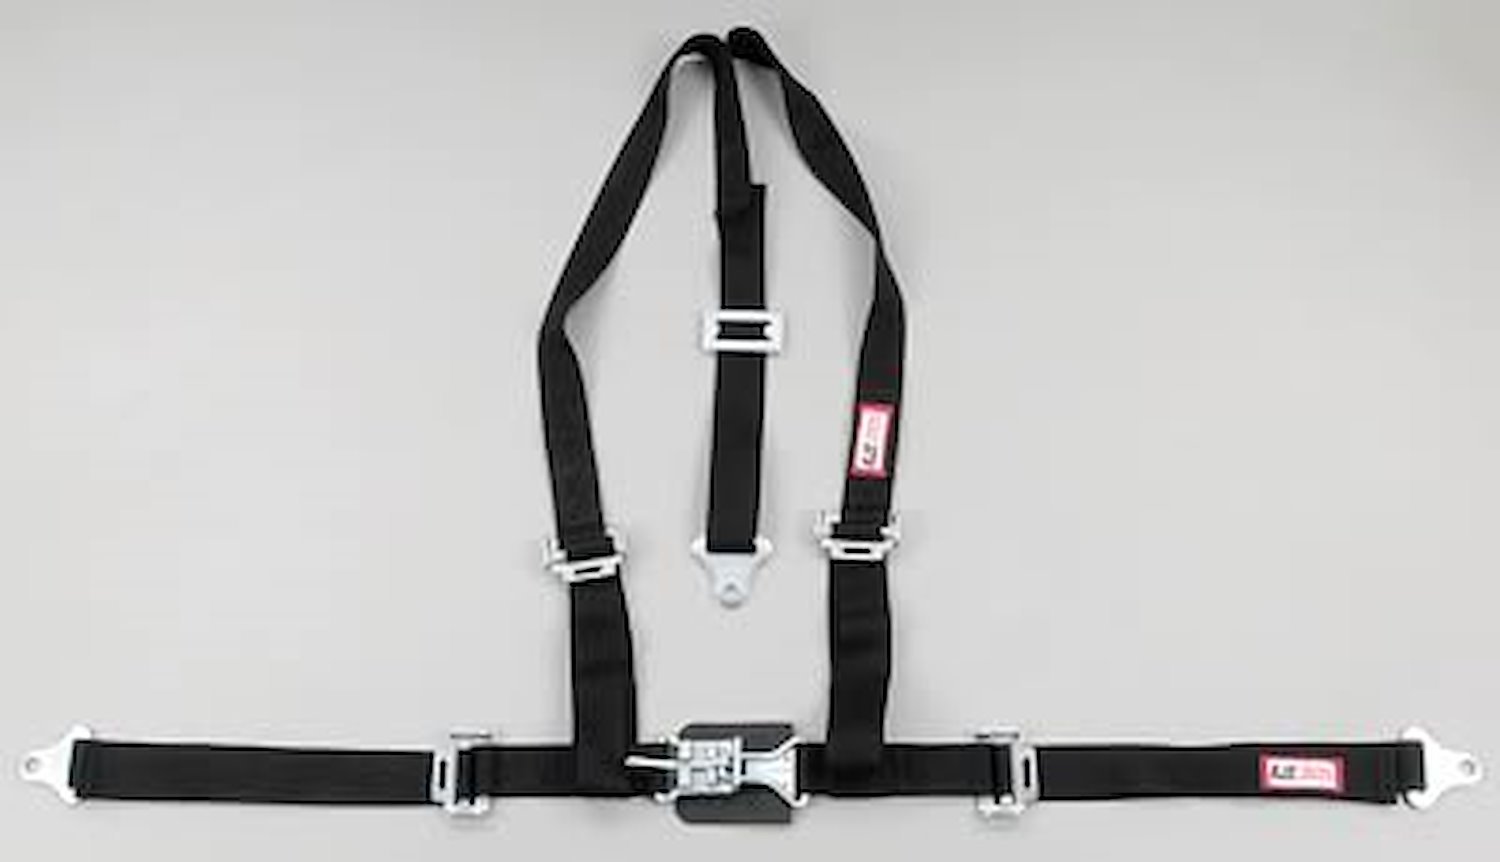 NON-SFI L&L HARNESS 3 PULL UP Lap Belt SNAP SEWN IN 2 S.H. Individual ROLL BAR Mount w/STERNUM STRAP WRAP/SNAP RED